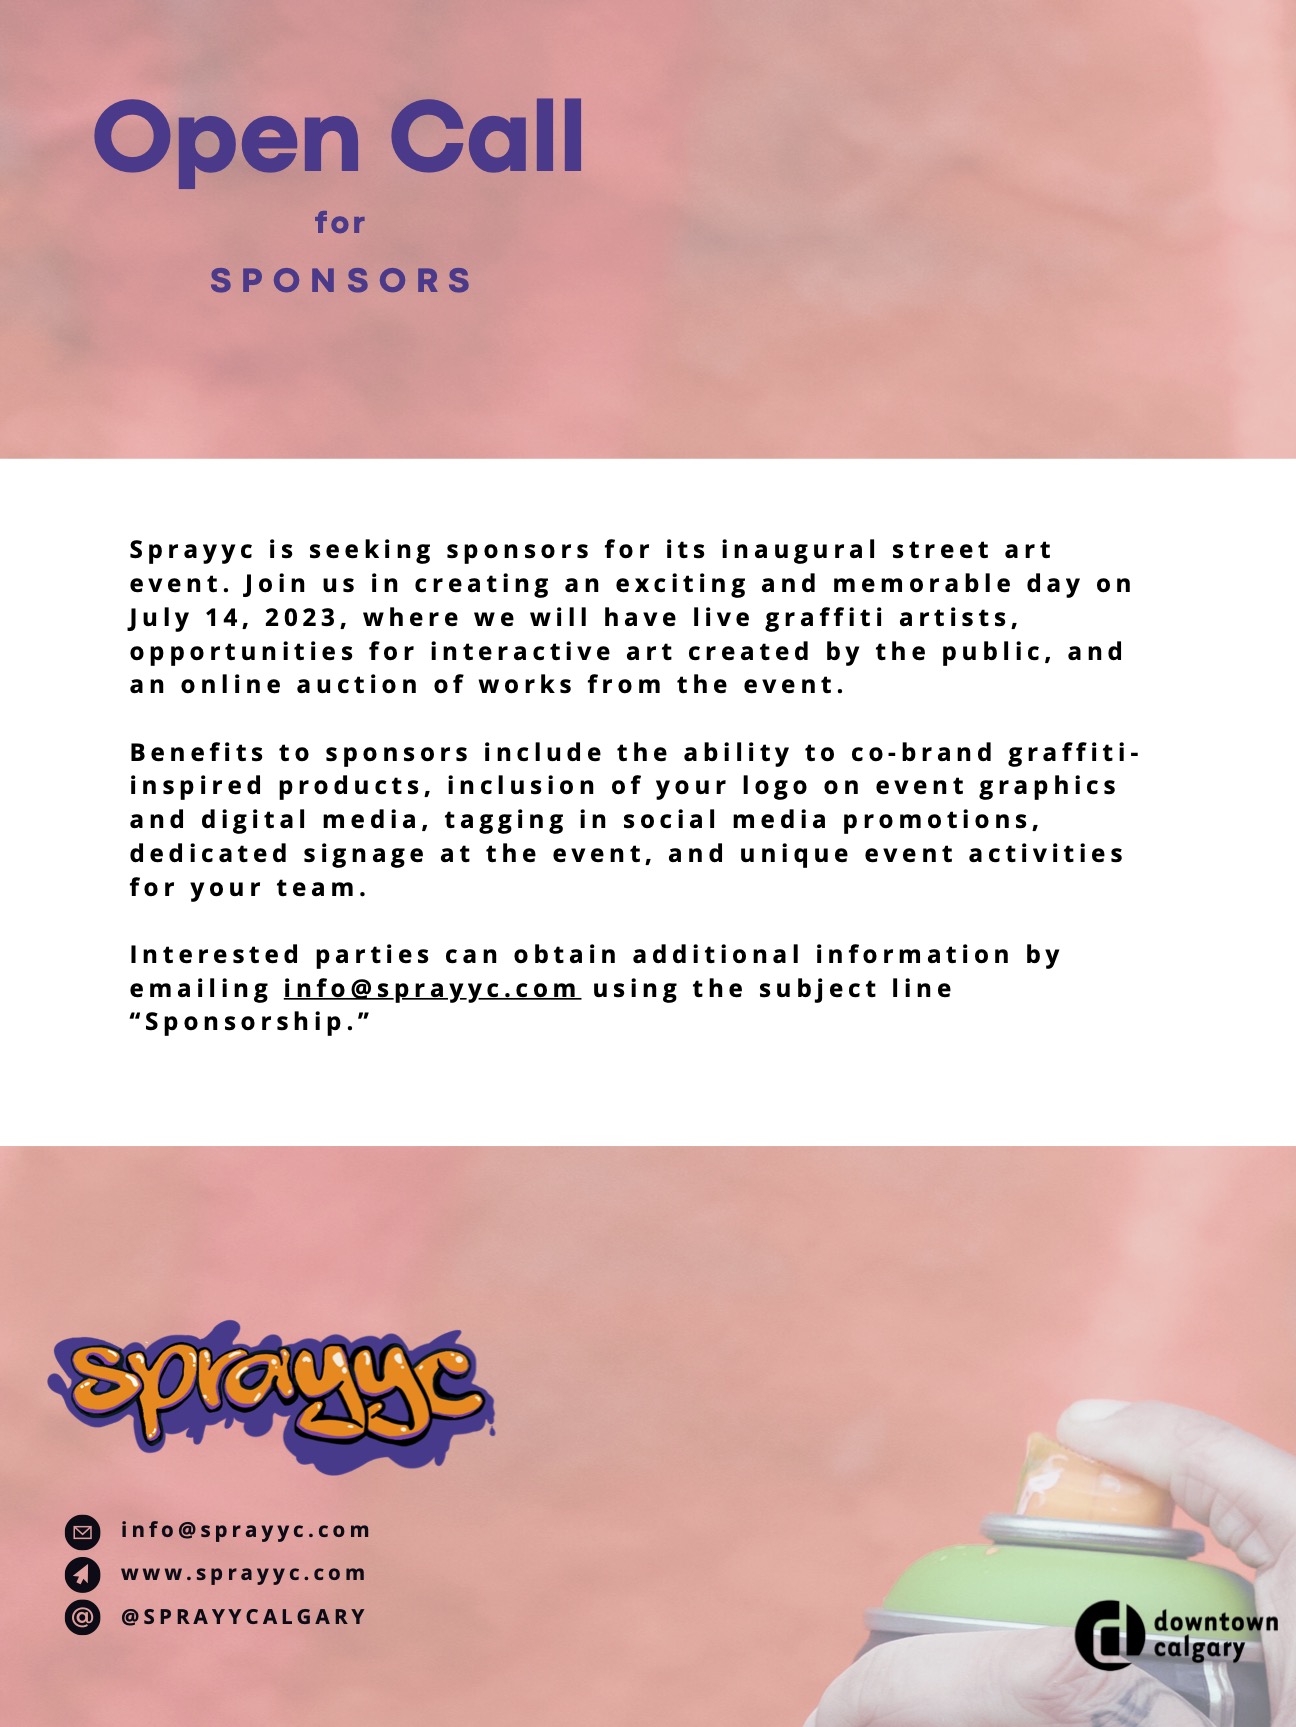 Sprayyc is seeking sponsors for its inaugural street art event. Join us in creating an exciting and memorable day on July 14, 2023, where we will have live graffiti artists, opportunities for interactive art created by the public, and an on line auction of works from the event. Benefits to sponsors include the ability to co-brand graffiti-inspired products, inclusion of your logo on event graphics and digital media, tagging in social media promotions, dedicated signage at the event, and unique event activities for your team. Interested parties can obtain additional information by emaiIinginfo@sprayyc.com using the subject Iine "Sponsorship." 